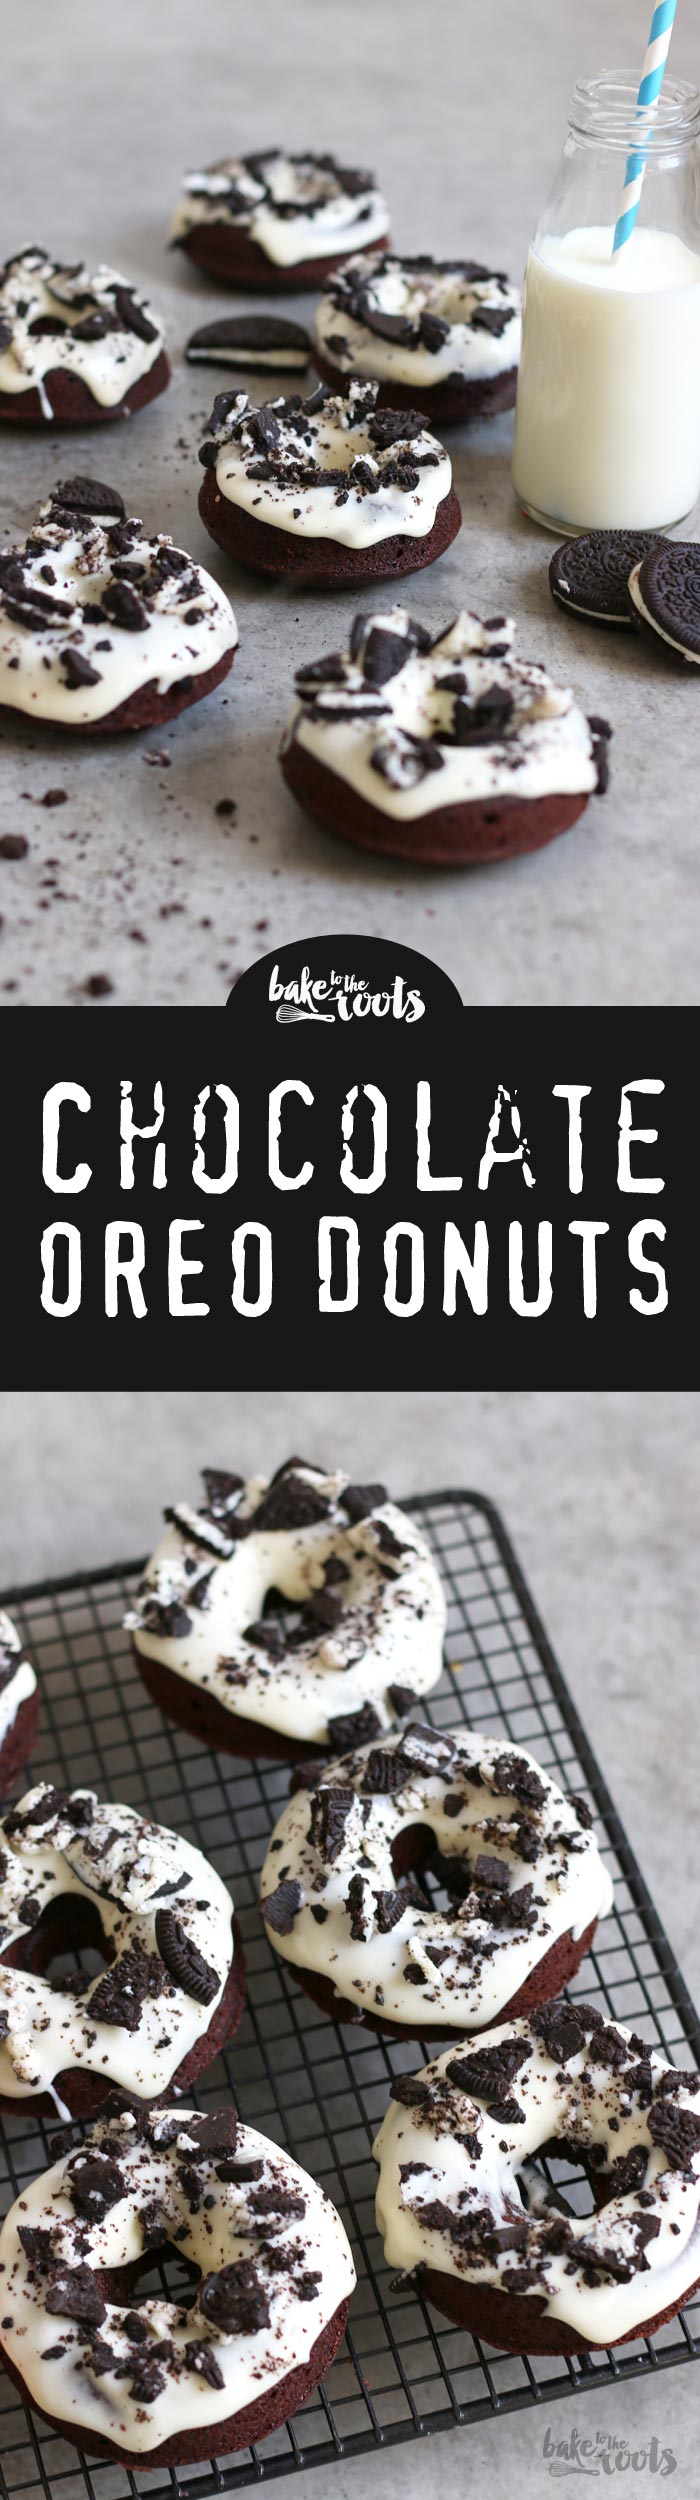 Delicious chocolate donuts with cream cheese frosting and oreos topping | Bake to the roots